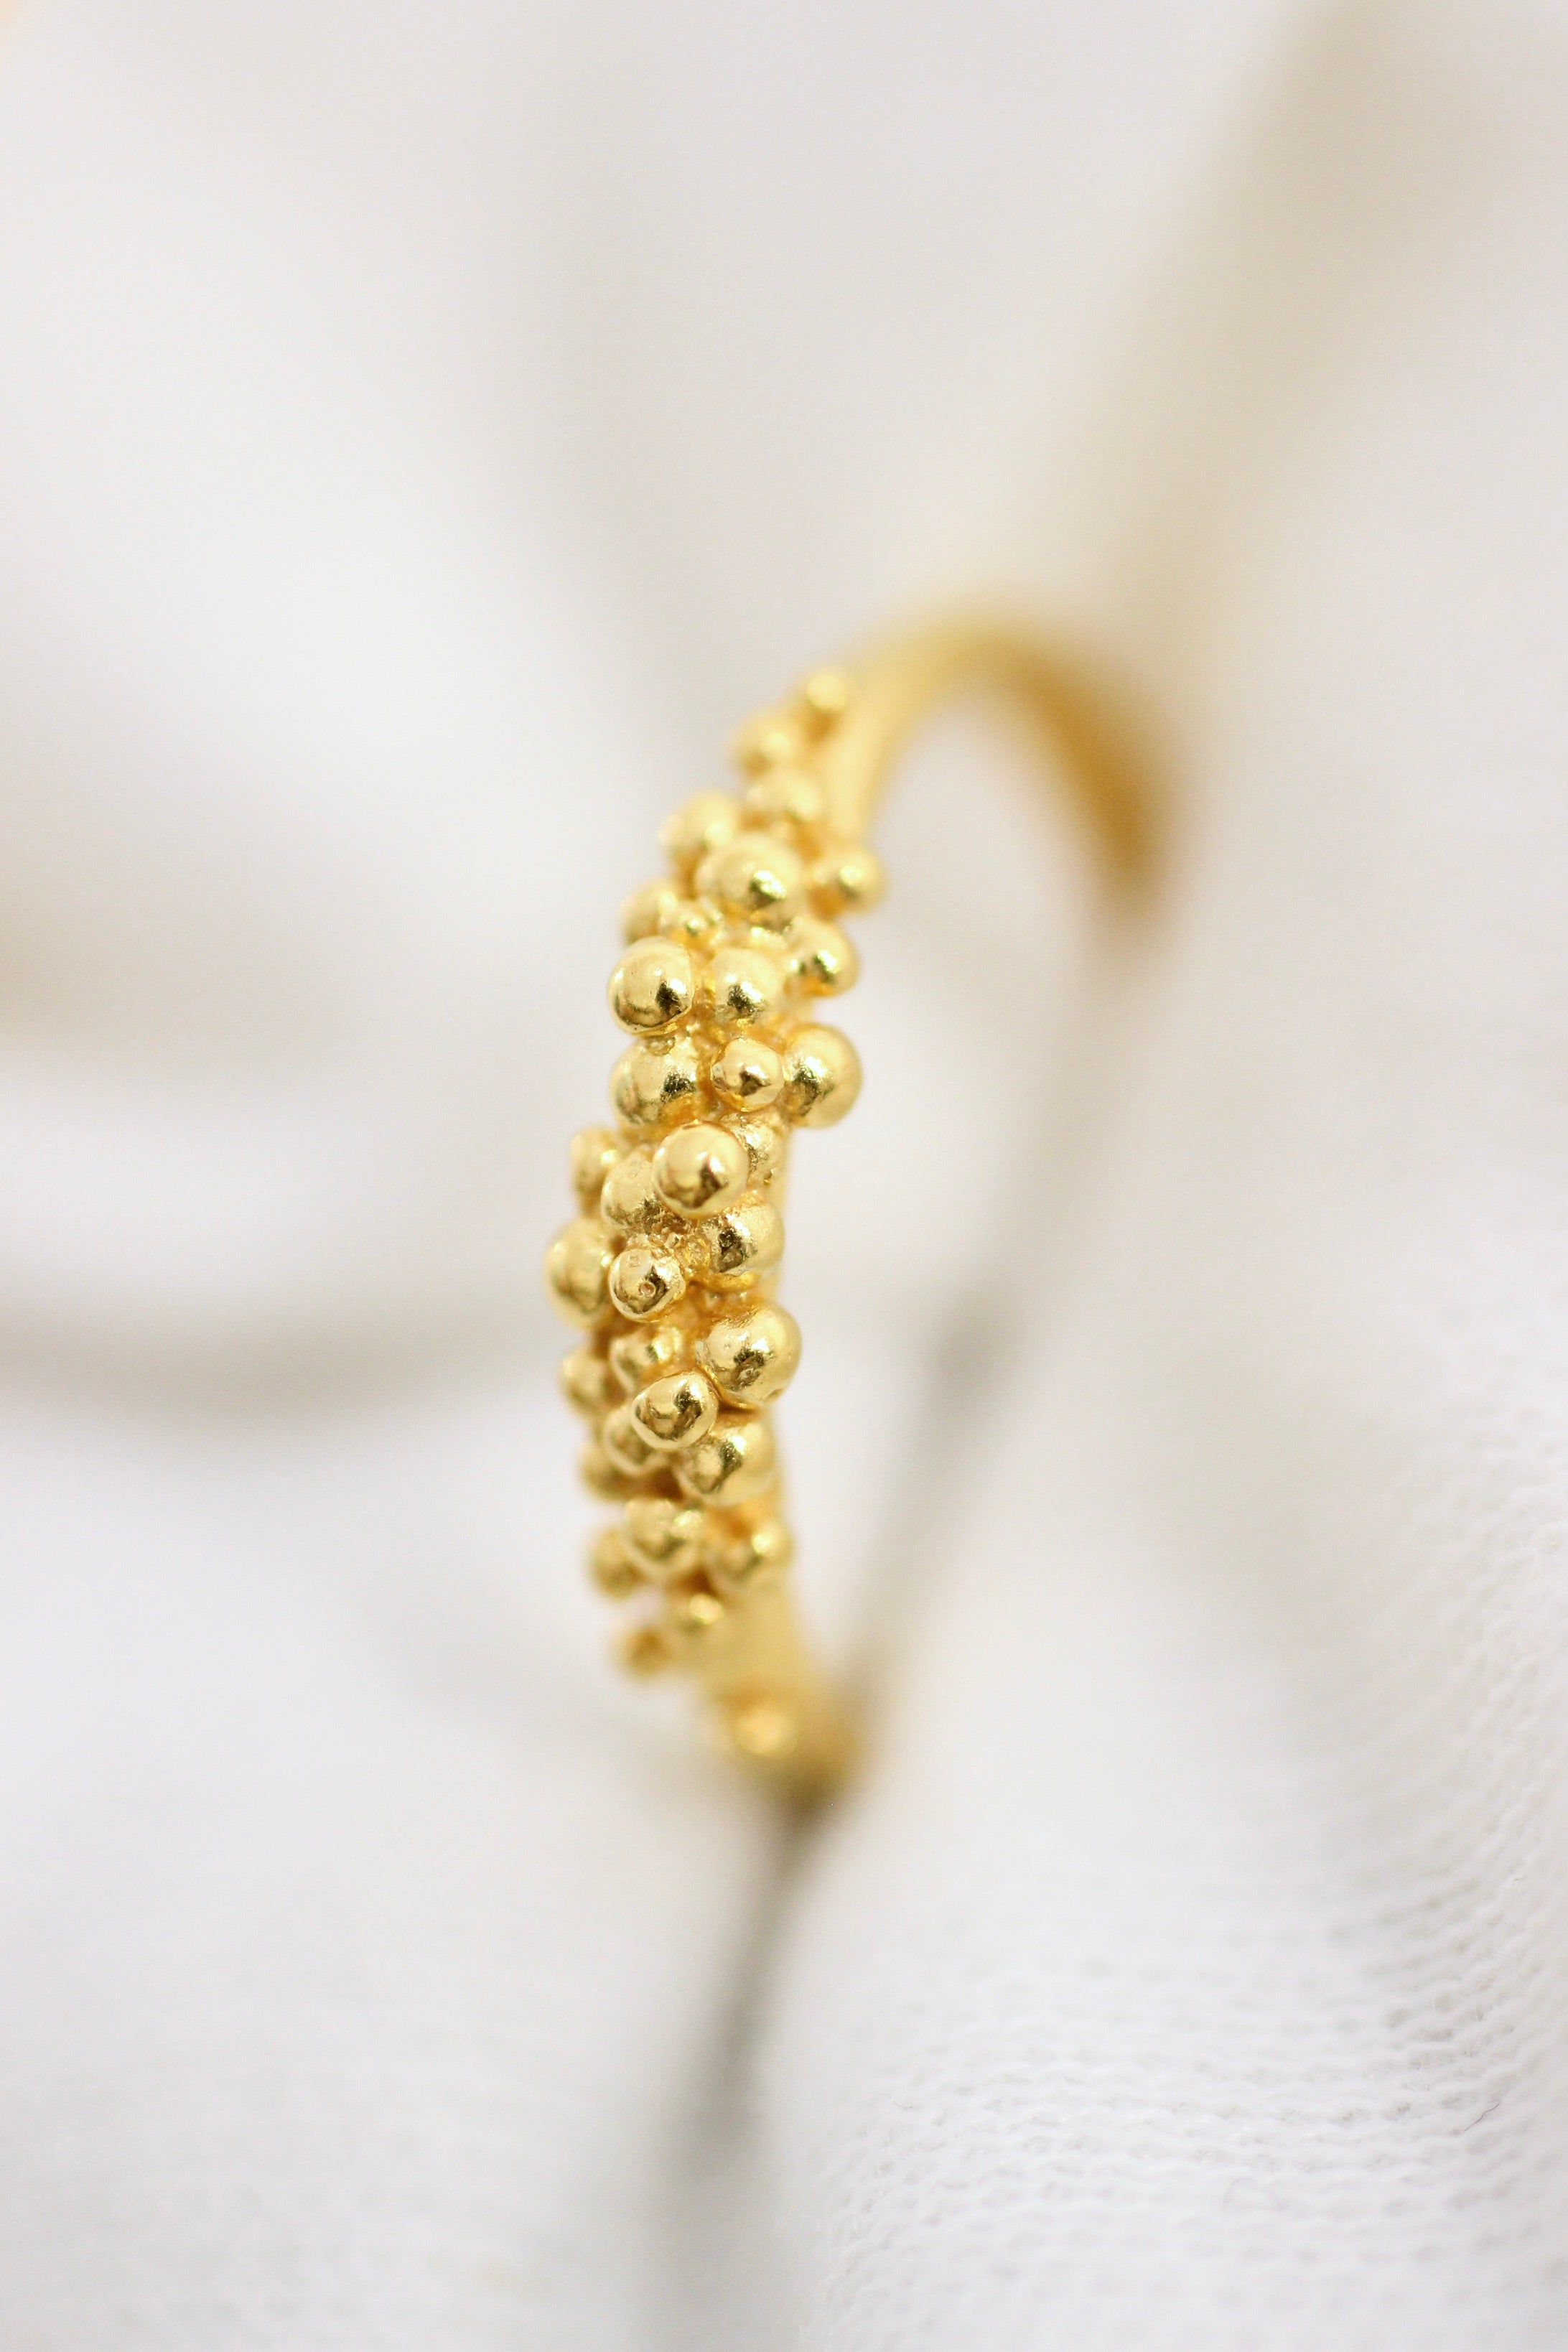 An 18K Yellow GOLD Essential Dot Ring from Cremilde Bispo Jewellery, featuring small gold balls for a stylish addition to your jewellery collection.